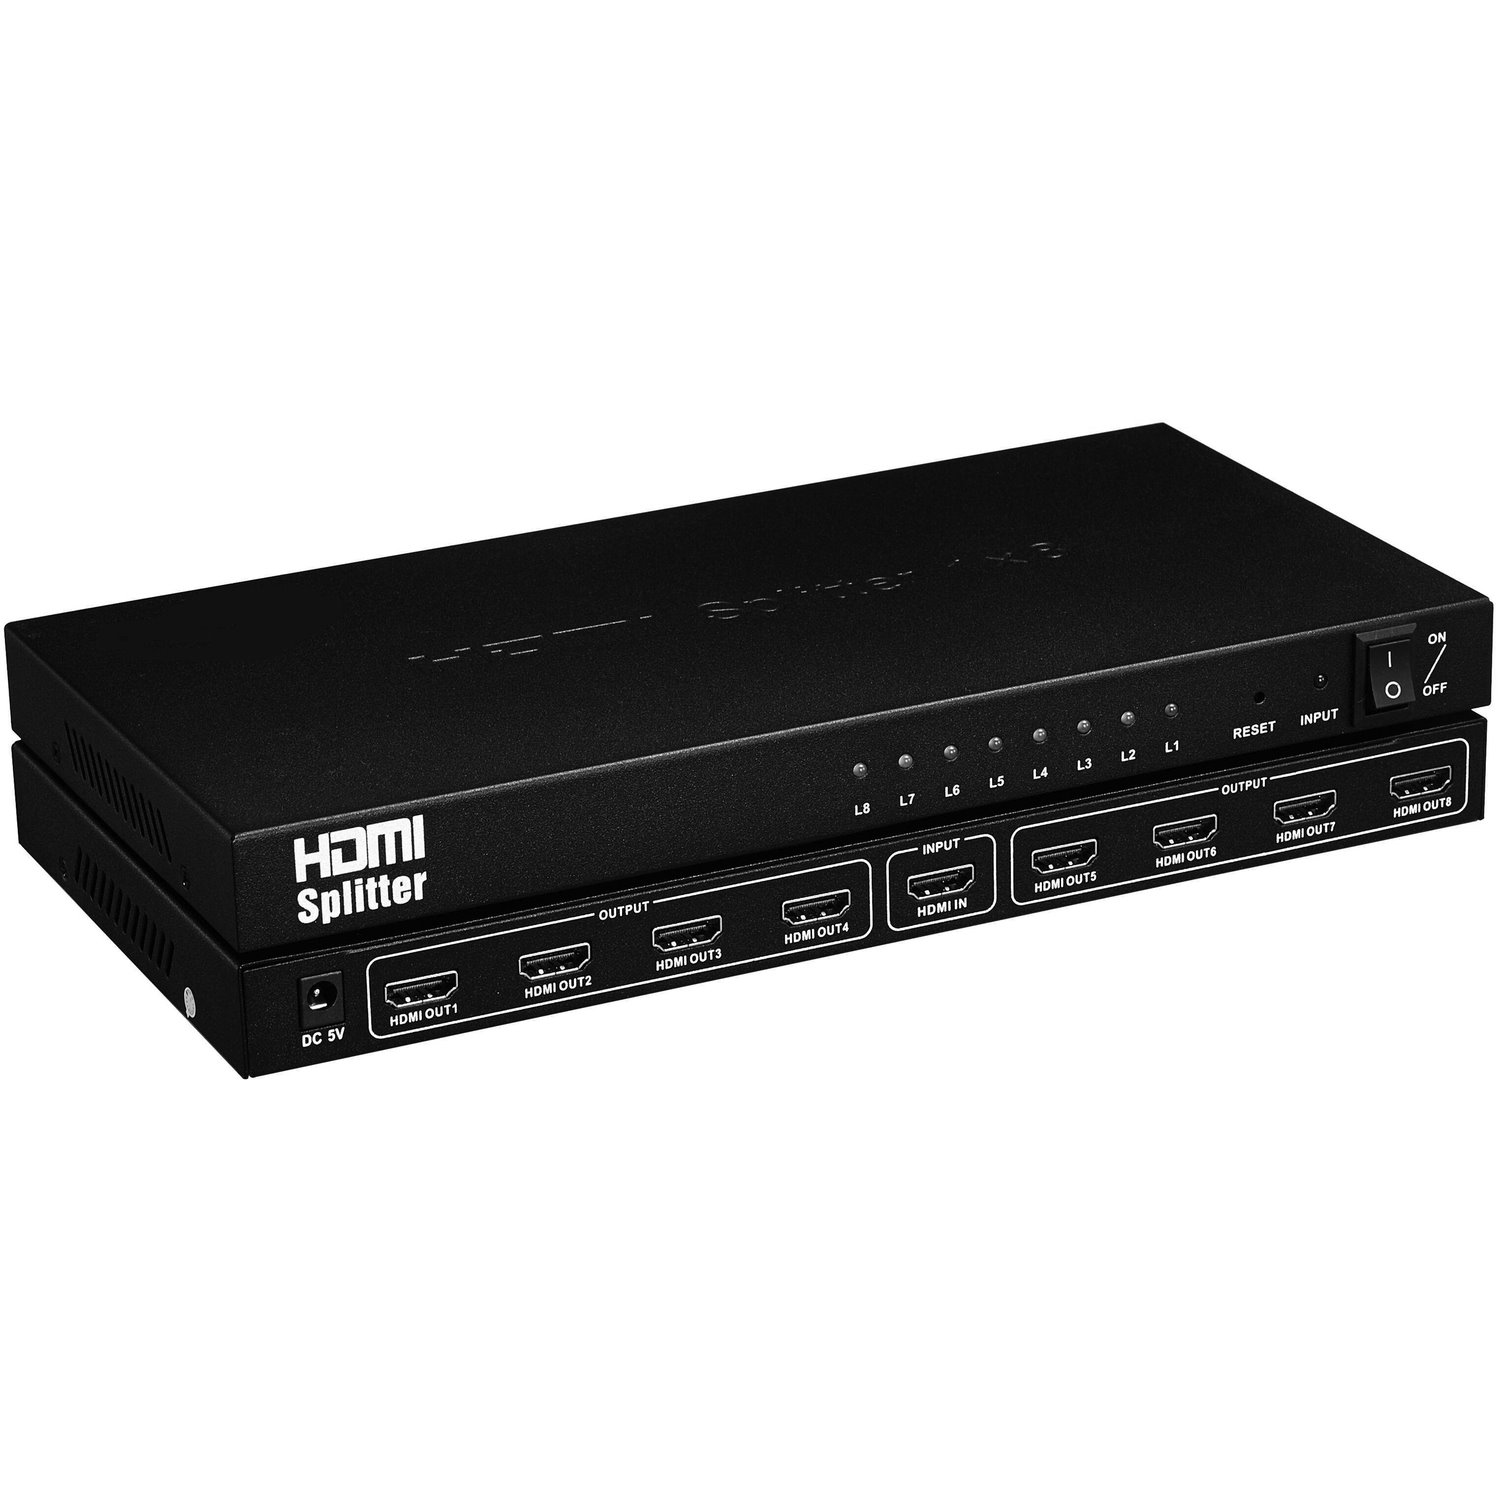 4XEM 8 Port high speed HDMI video splitter fully supporting 1080p, 3D for Blu-Ray, gaming consoles and all other HDMI compatible devices